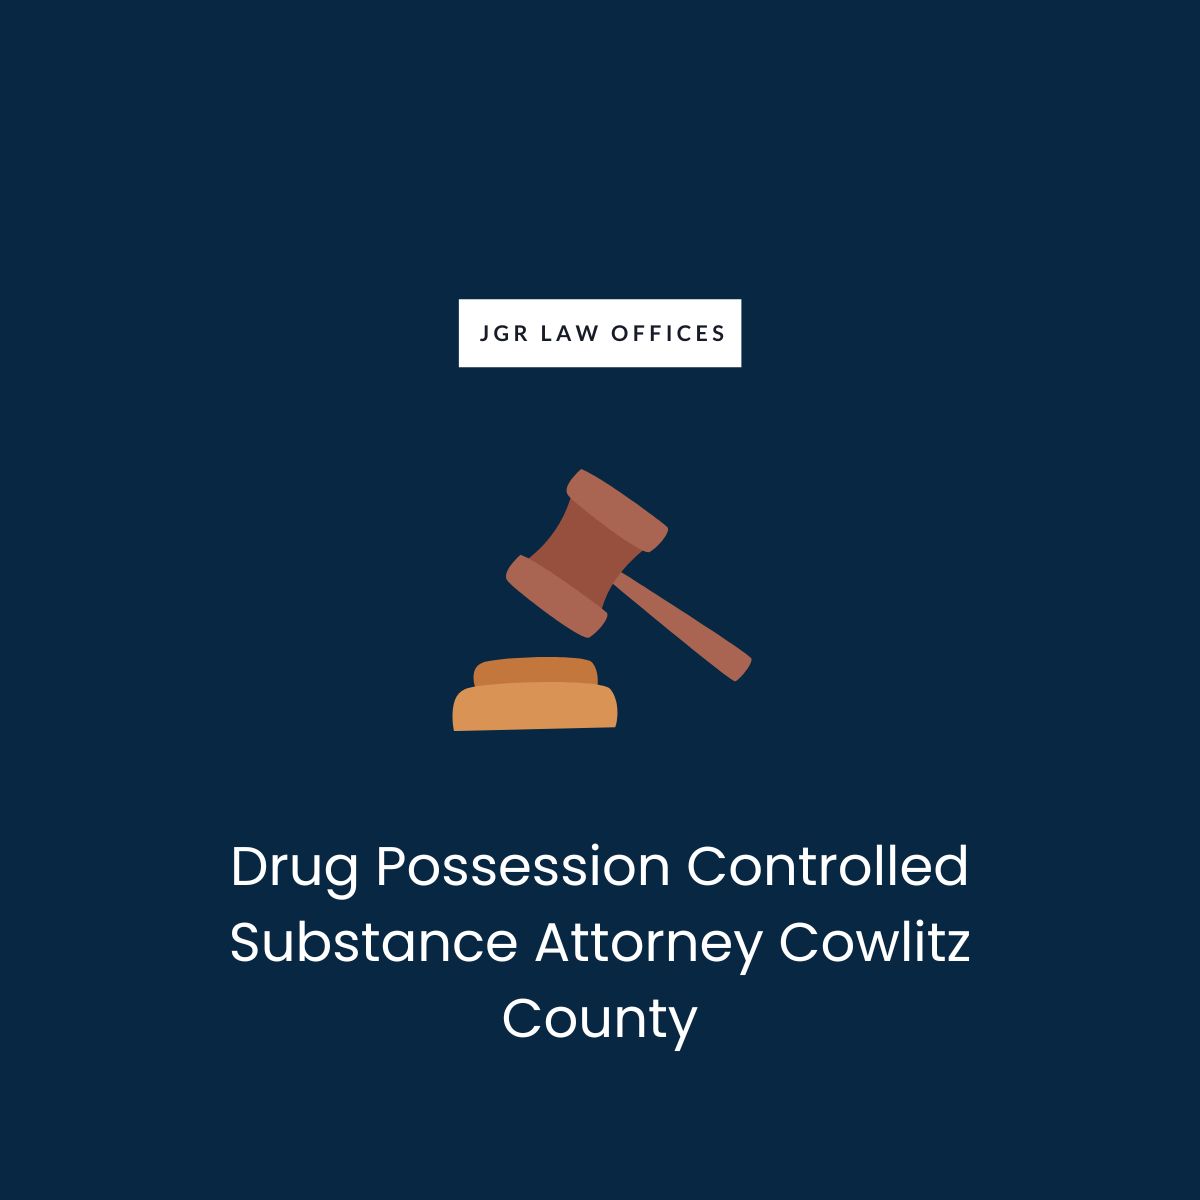 Drug Possession Controlled Substance Attorney Cowlitz County